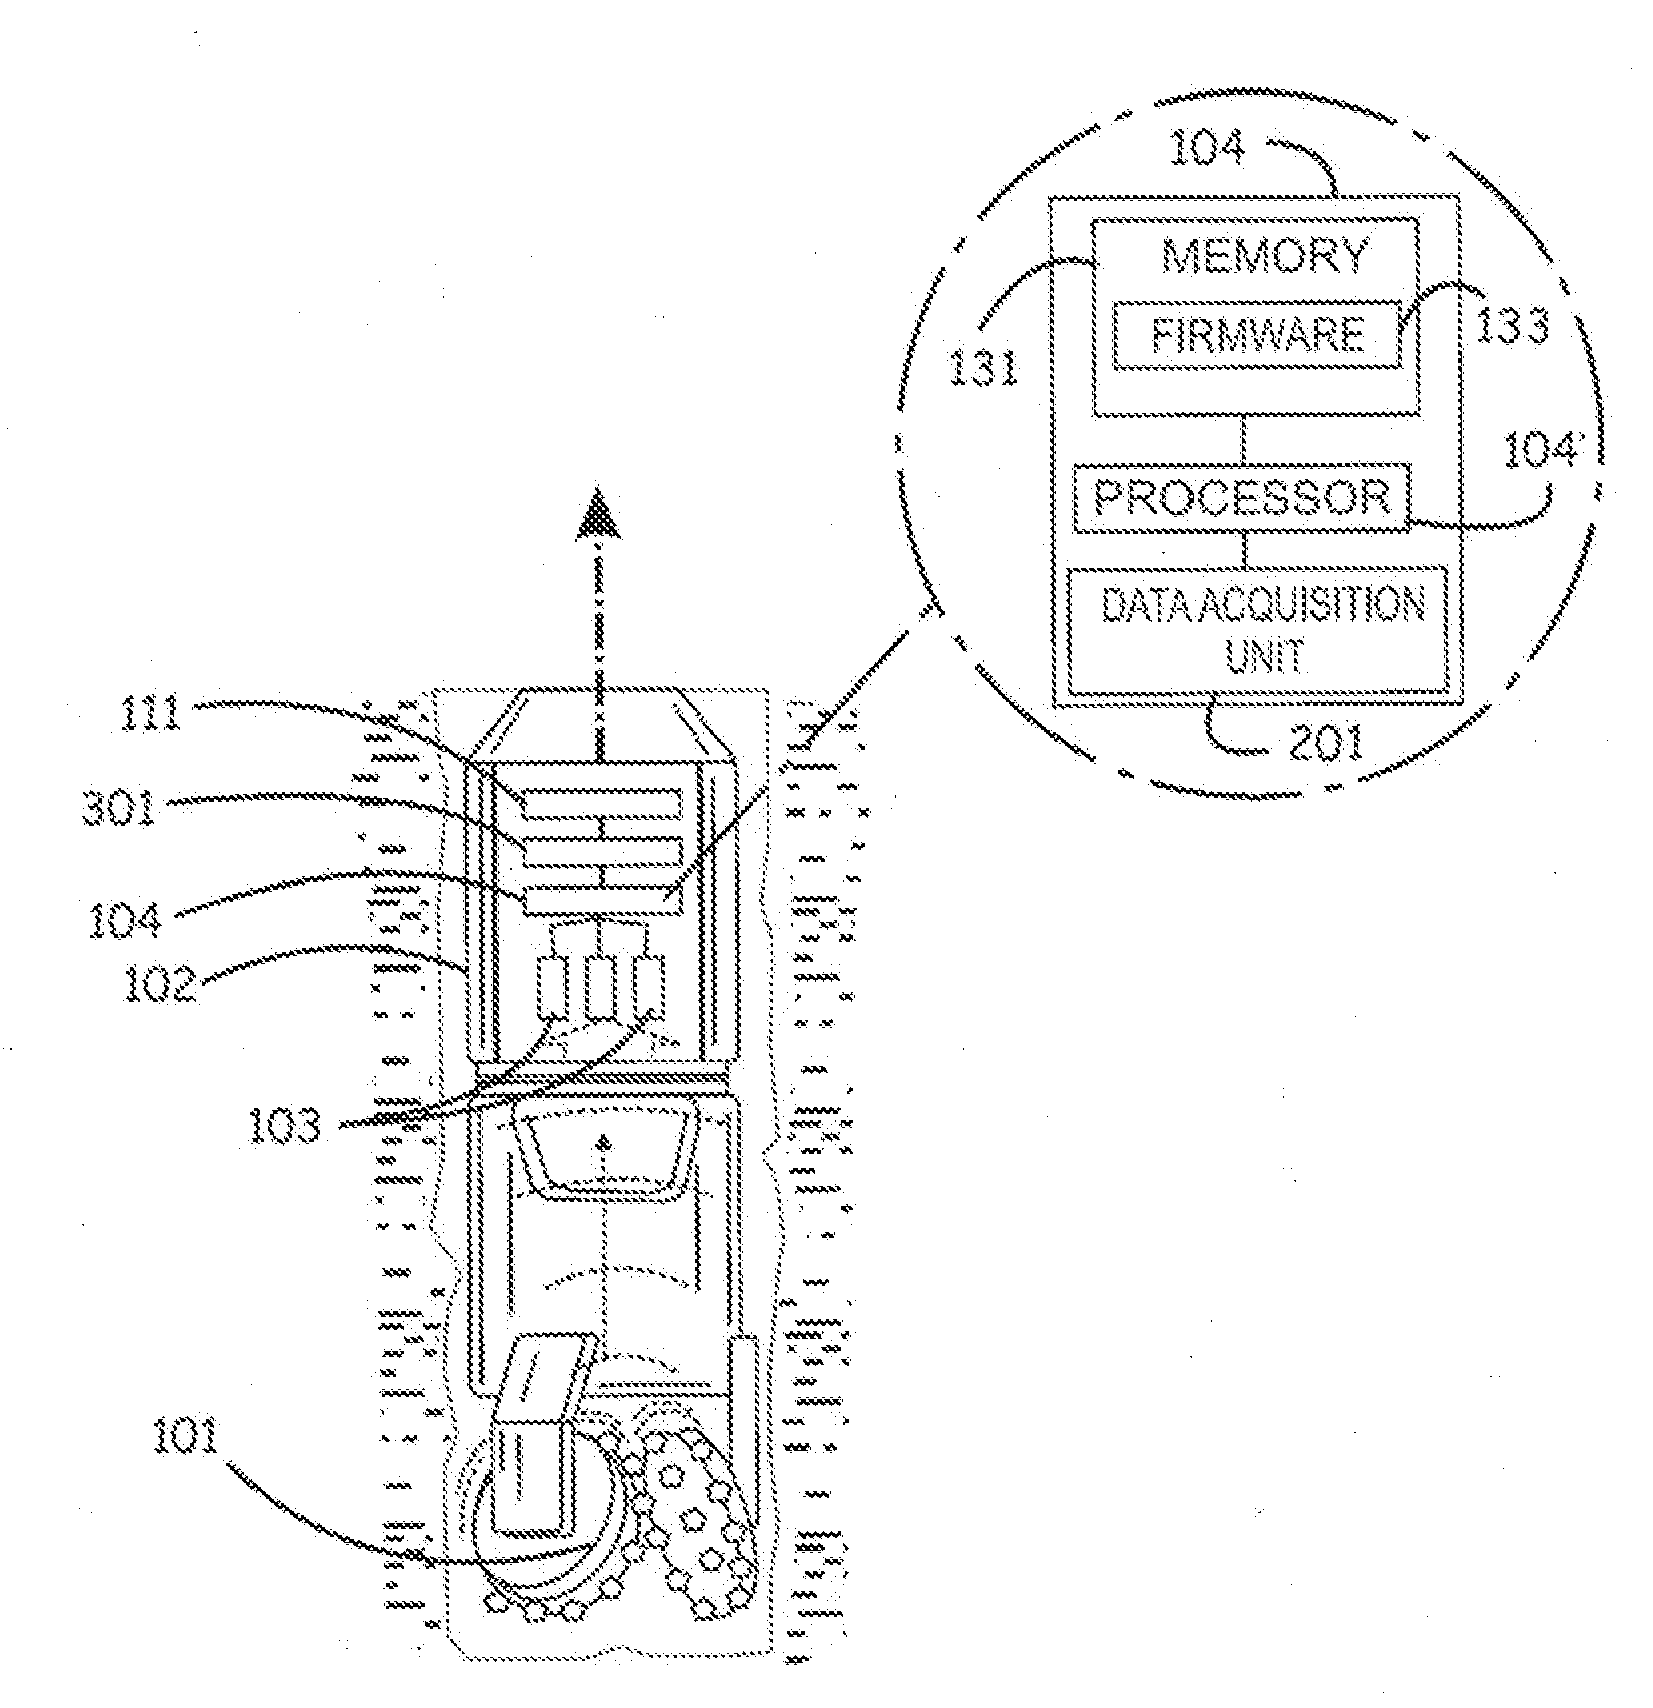 Method of evaluating rock properties while drilling using downhole acoustic sensors and telemetry system